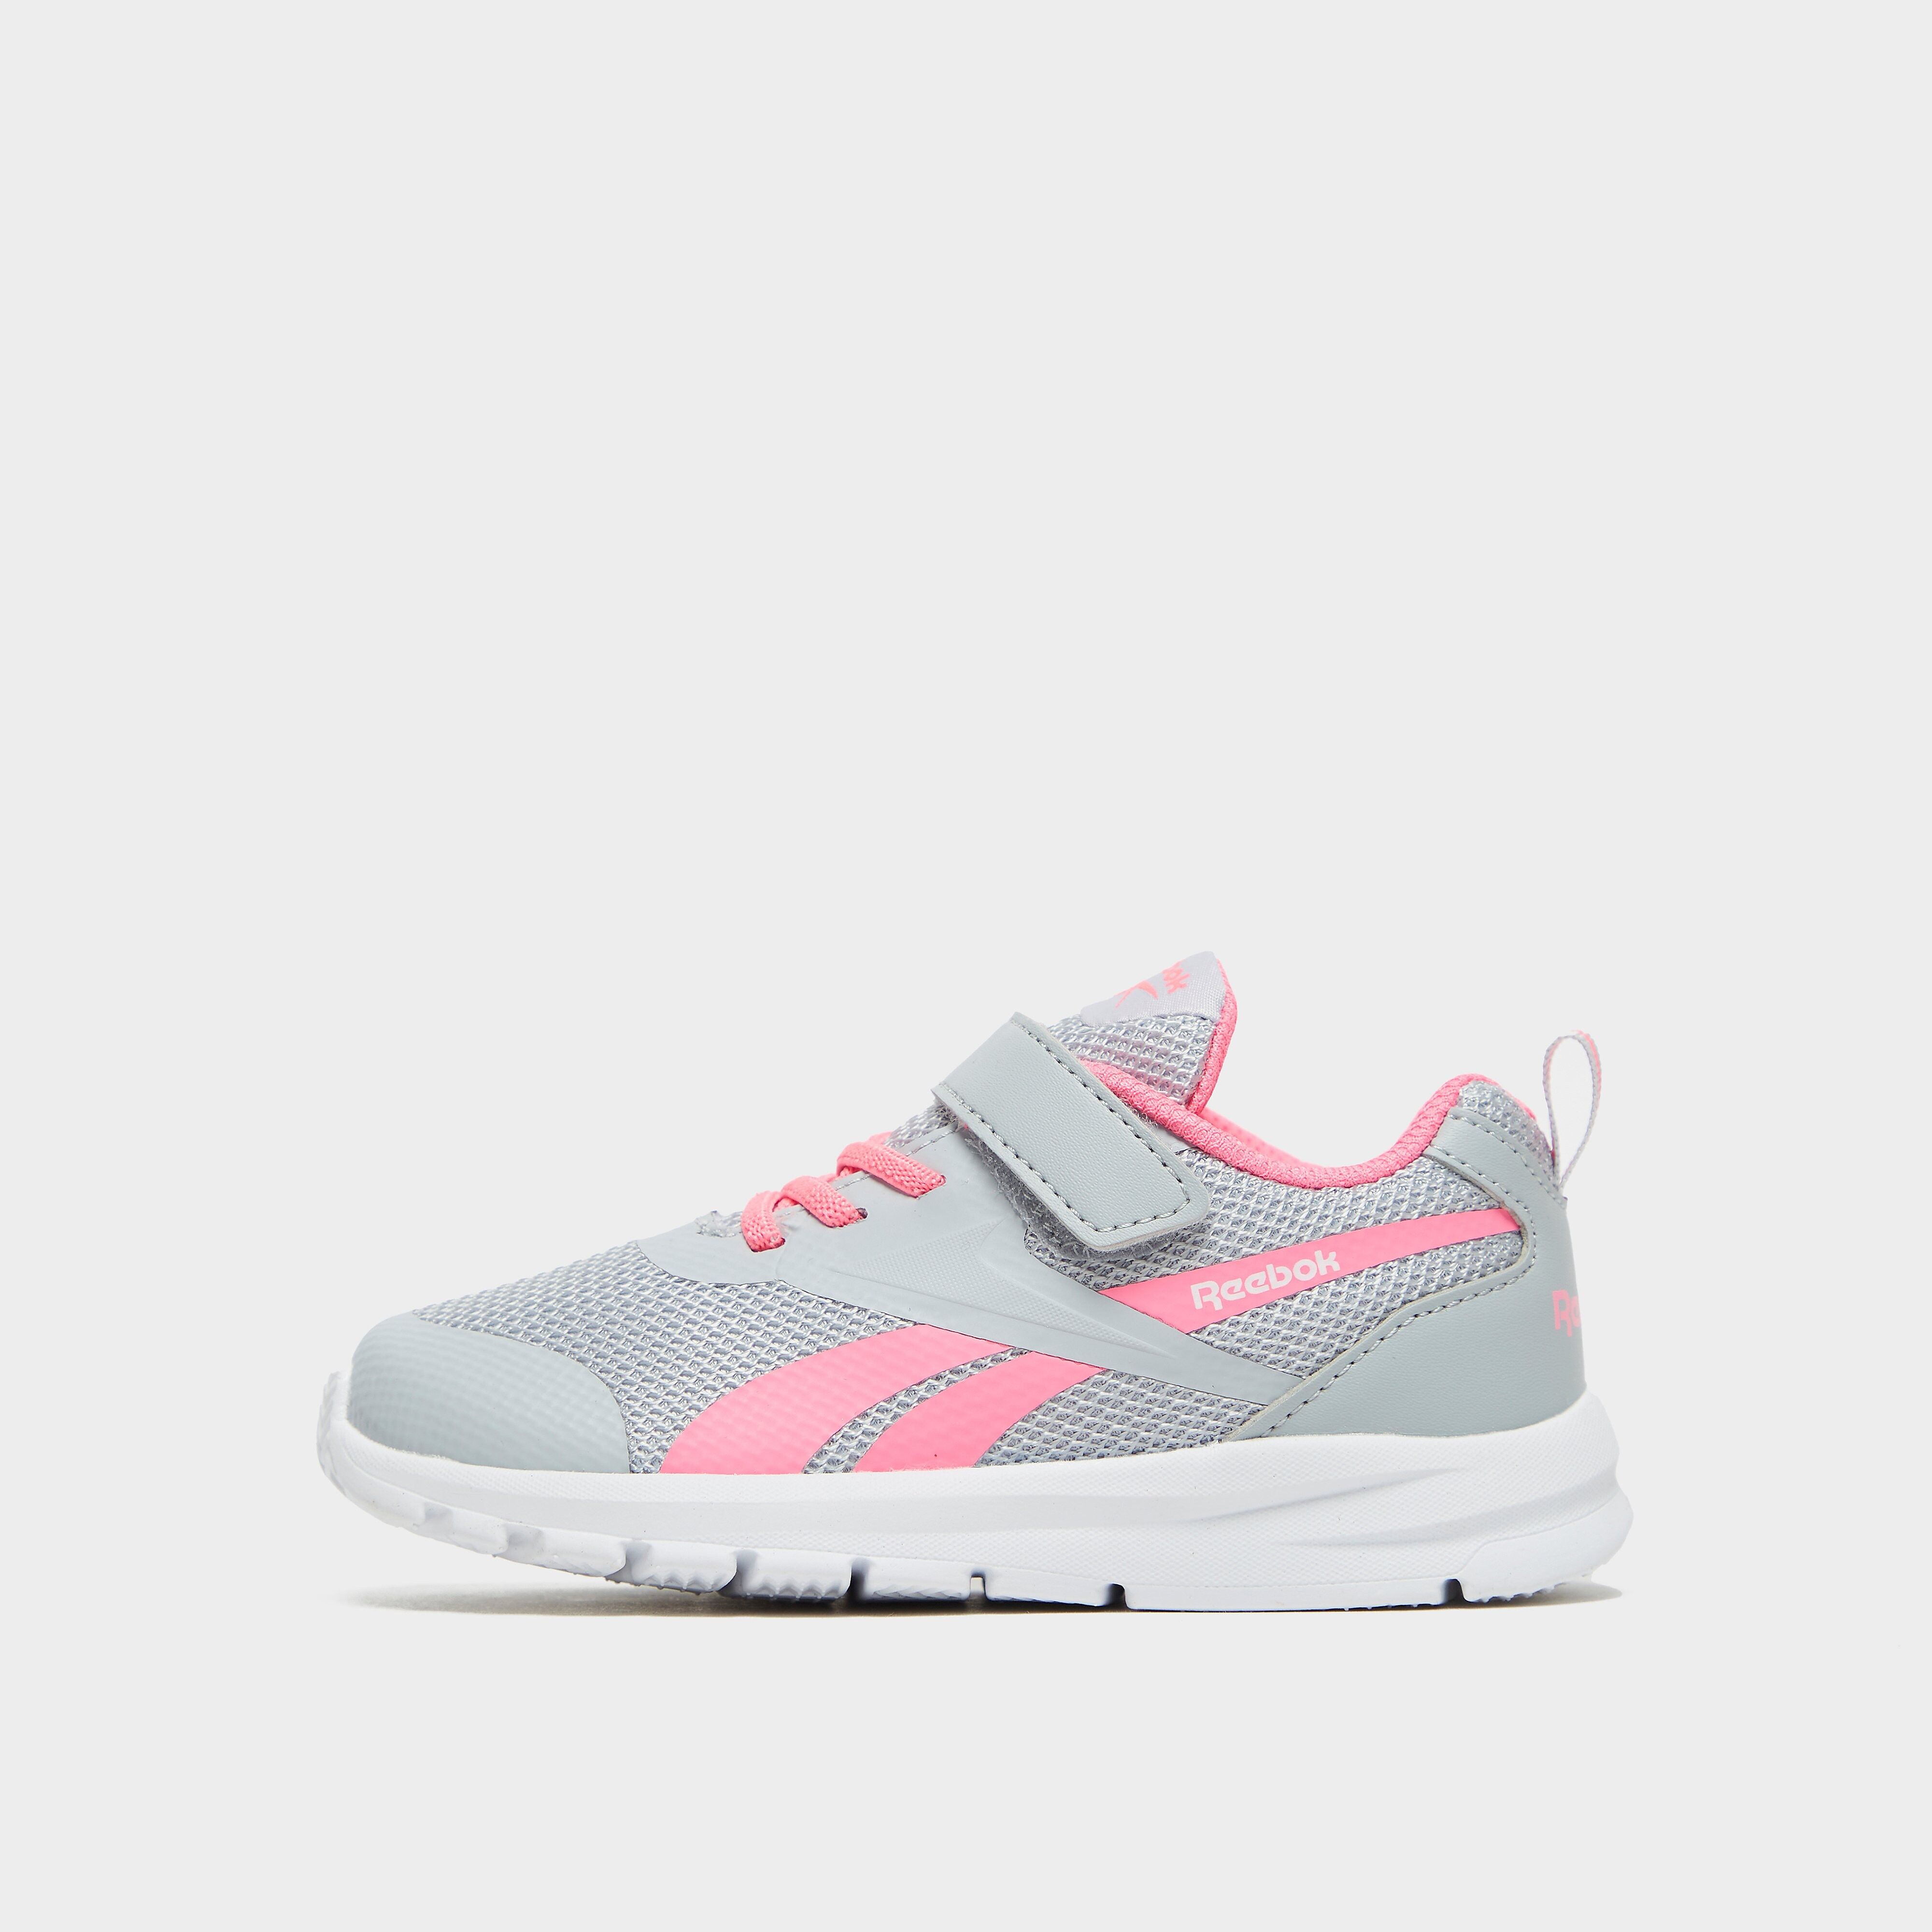 Reebok Rush Runner Infant - Cold Grey 2 / Electro Pink / White  size: 6.5